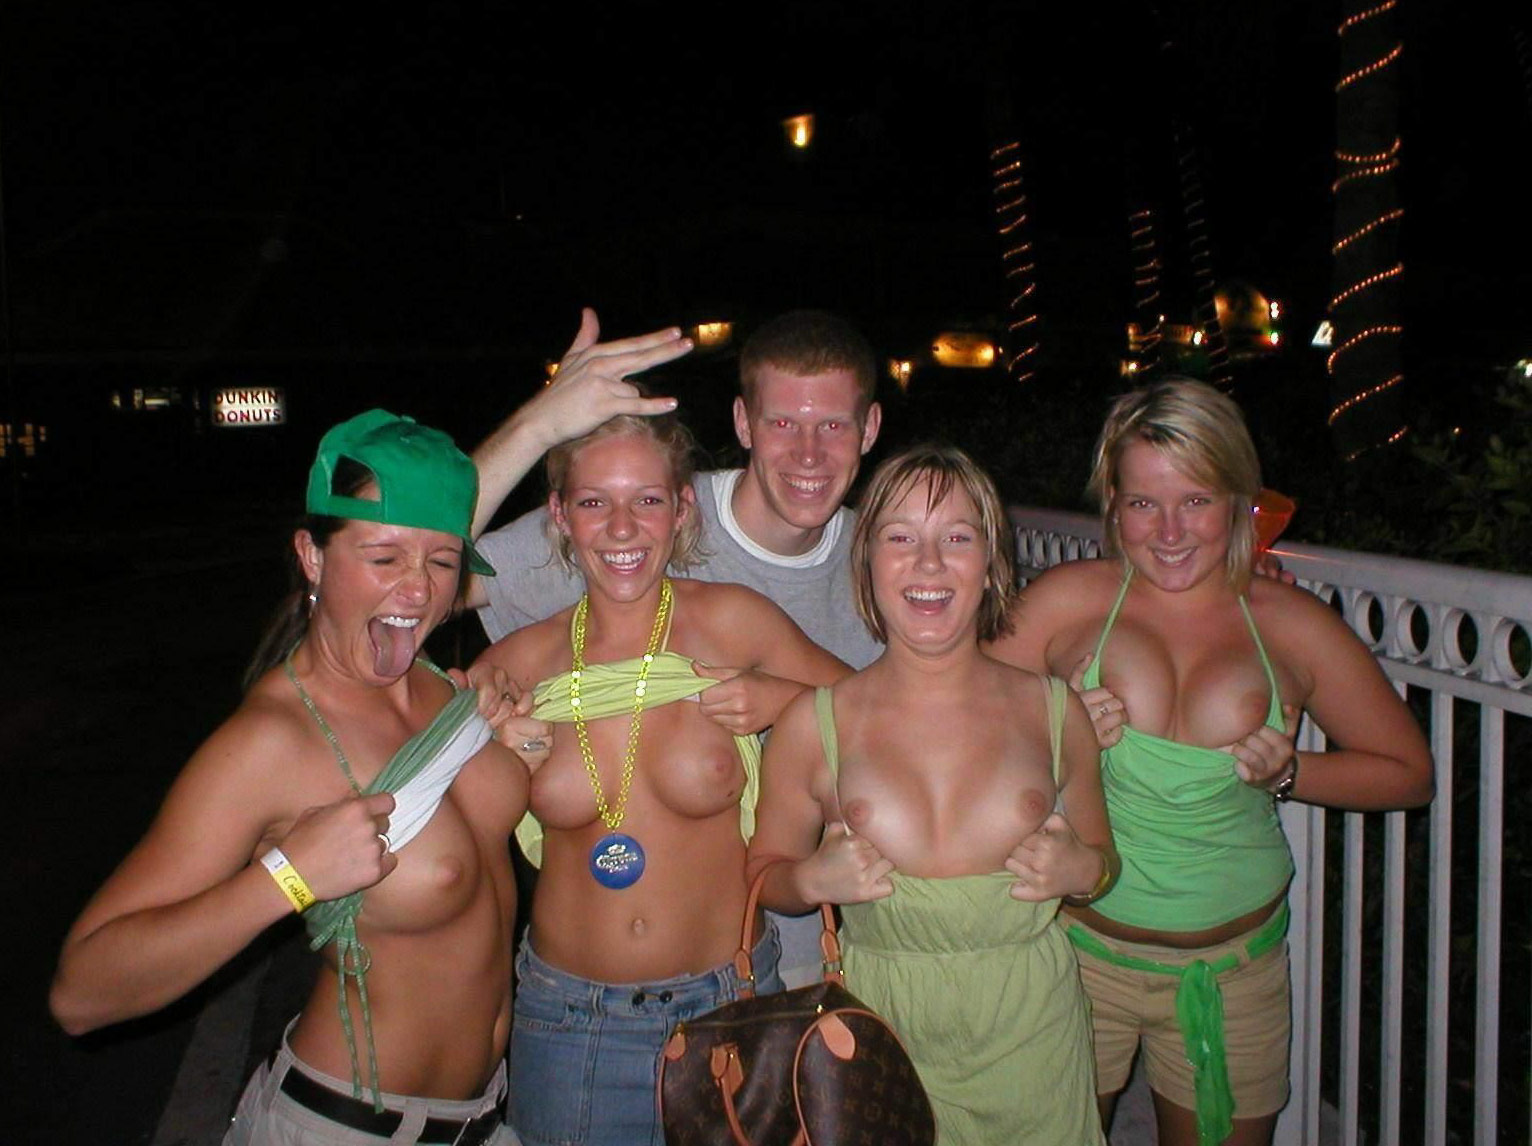 Big groups of girls flashing with their tits together - Night Flashers.